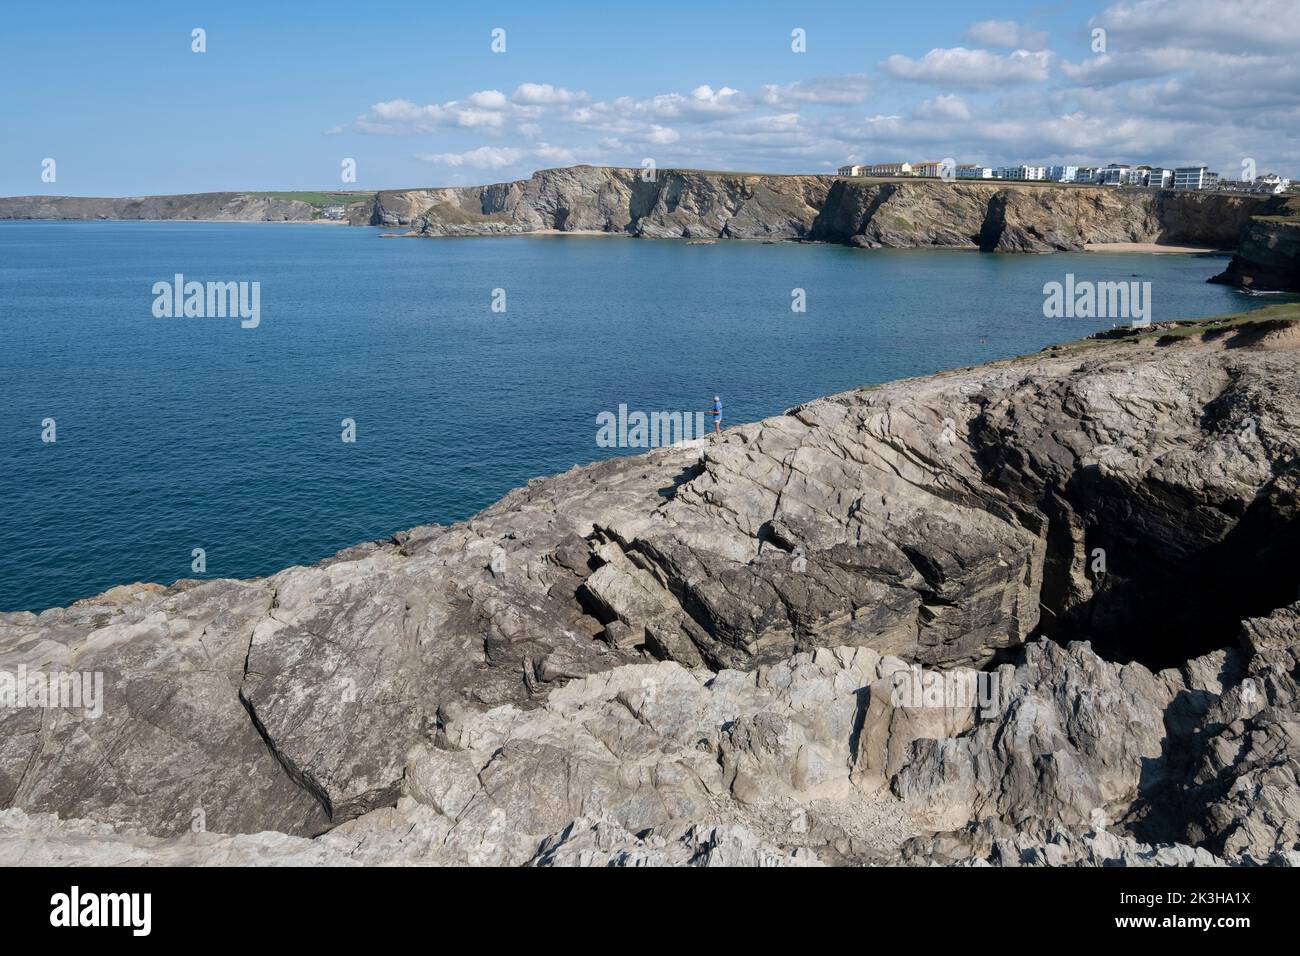 A lone fisherman on the rugged rocks of the cliffs at Porth, north Cornwall, England with the ocean beyond. Stock Photo